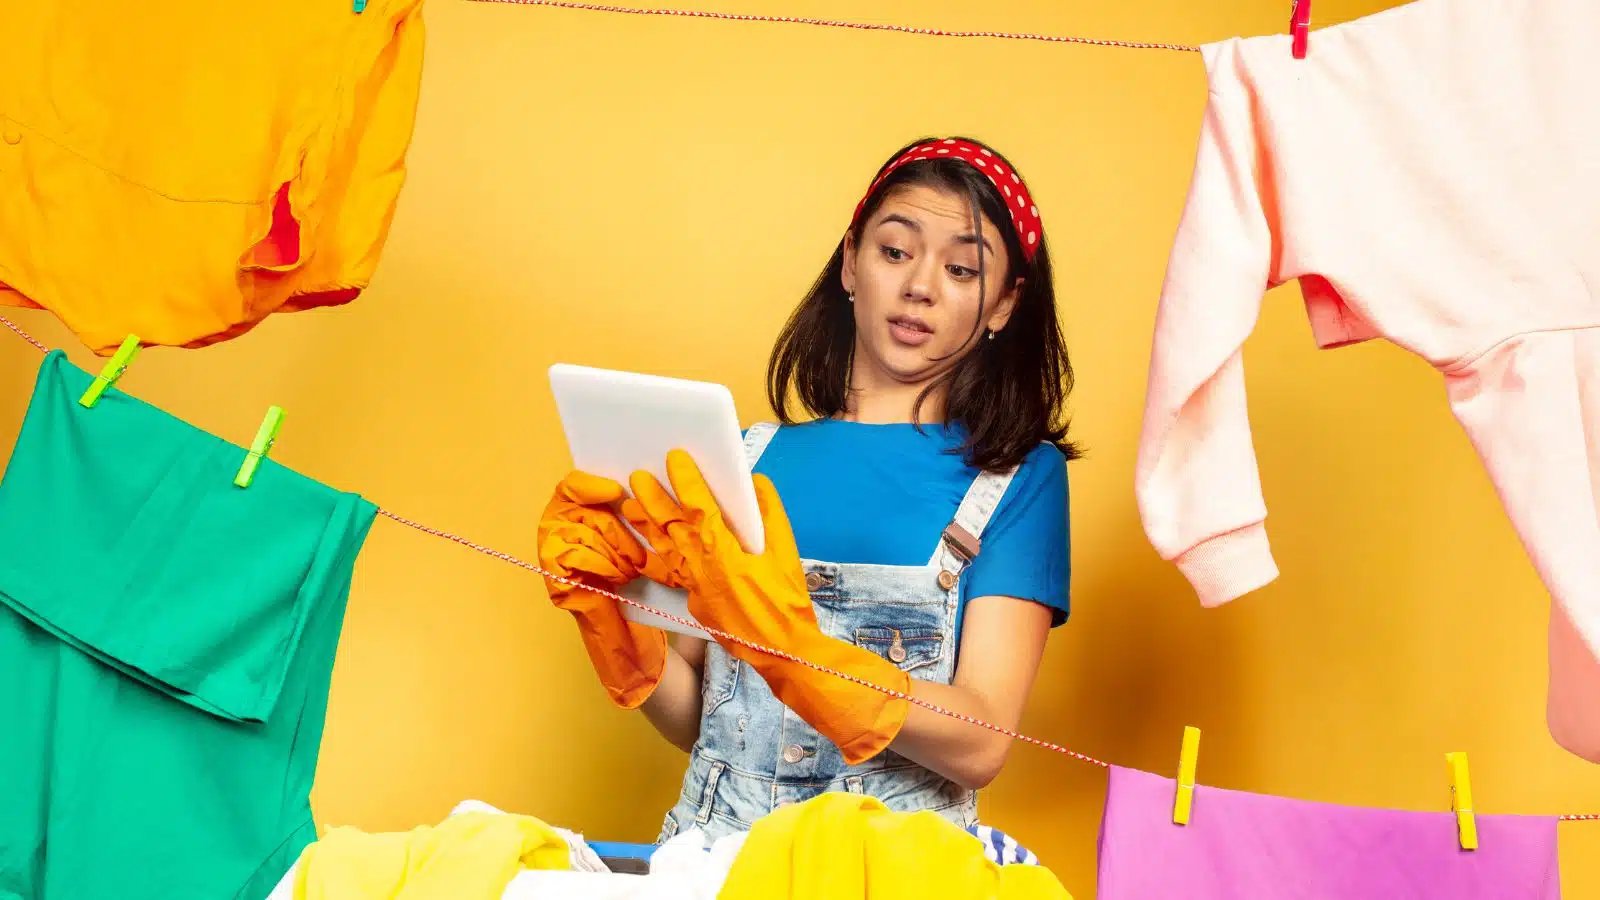 frantic woman overwhelmed with laundry on yellow background